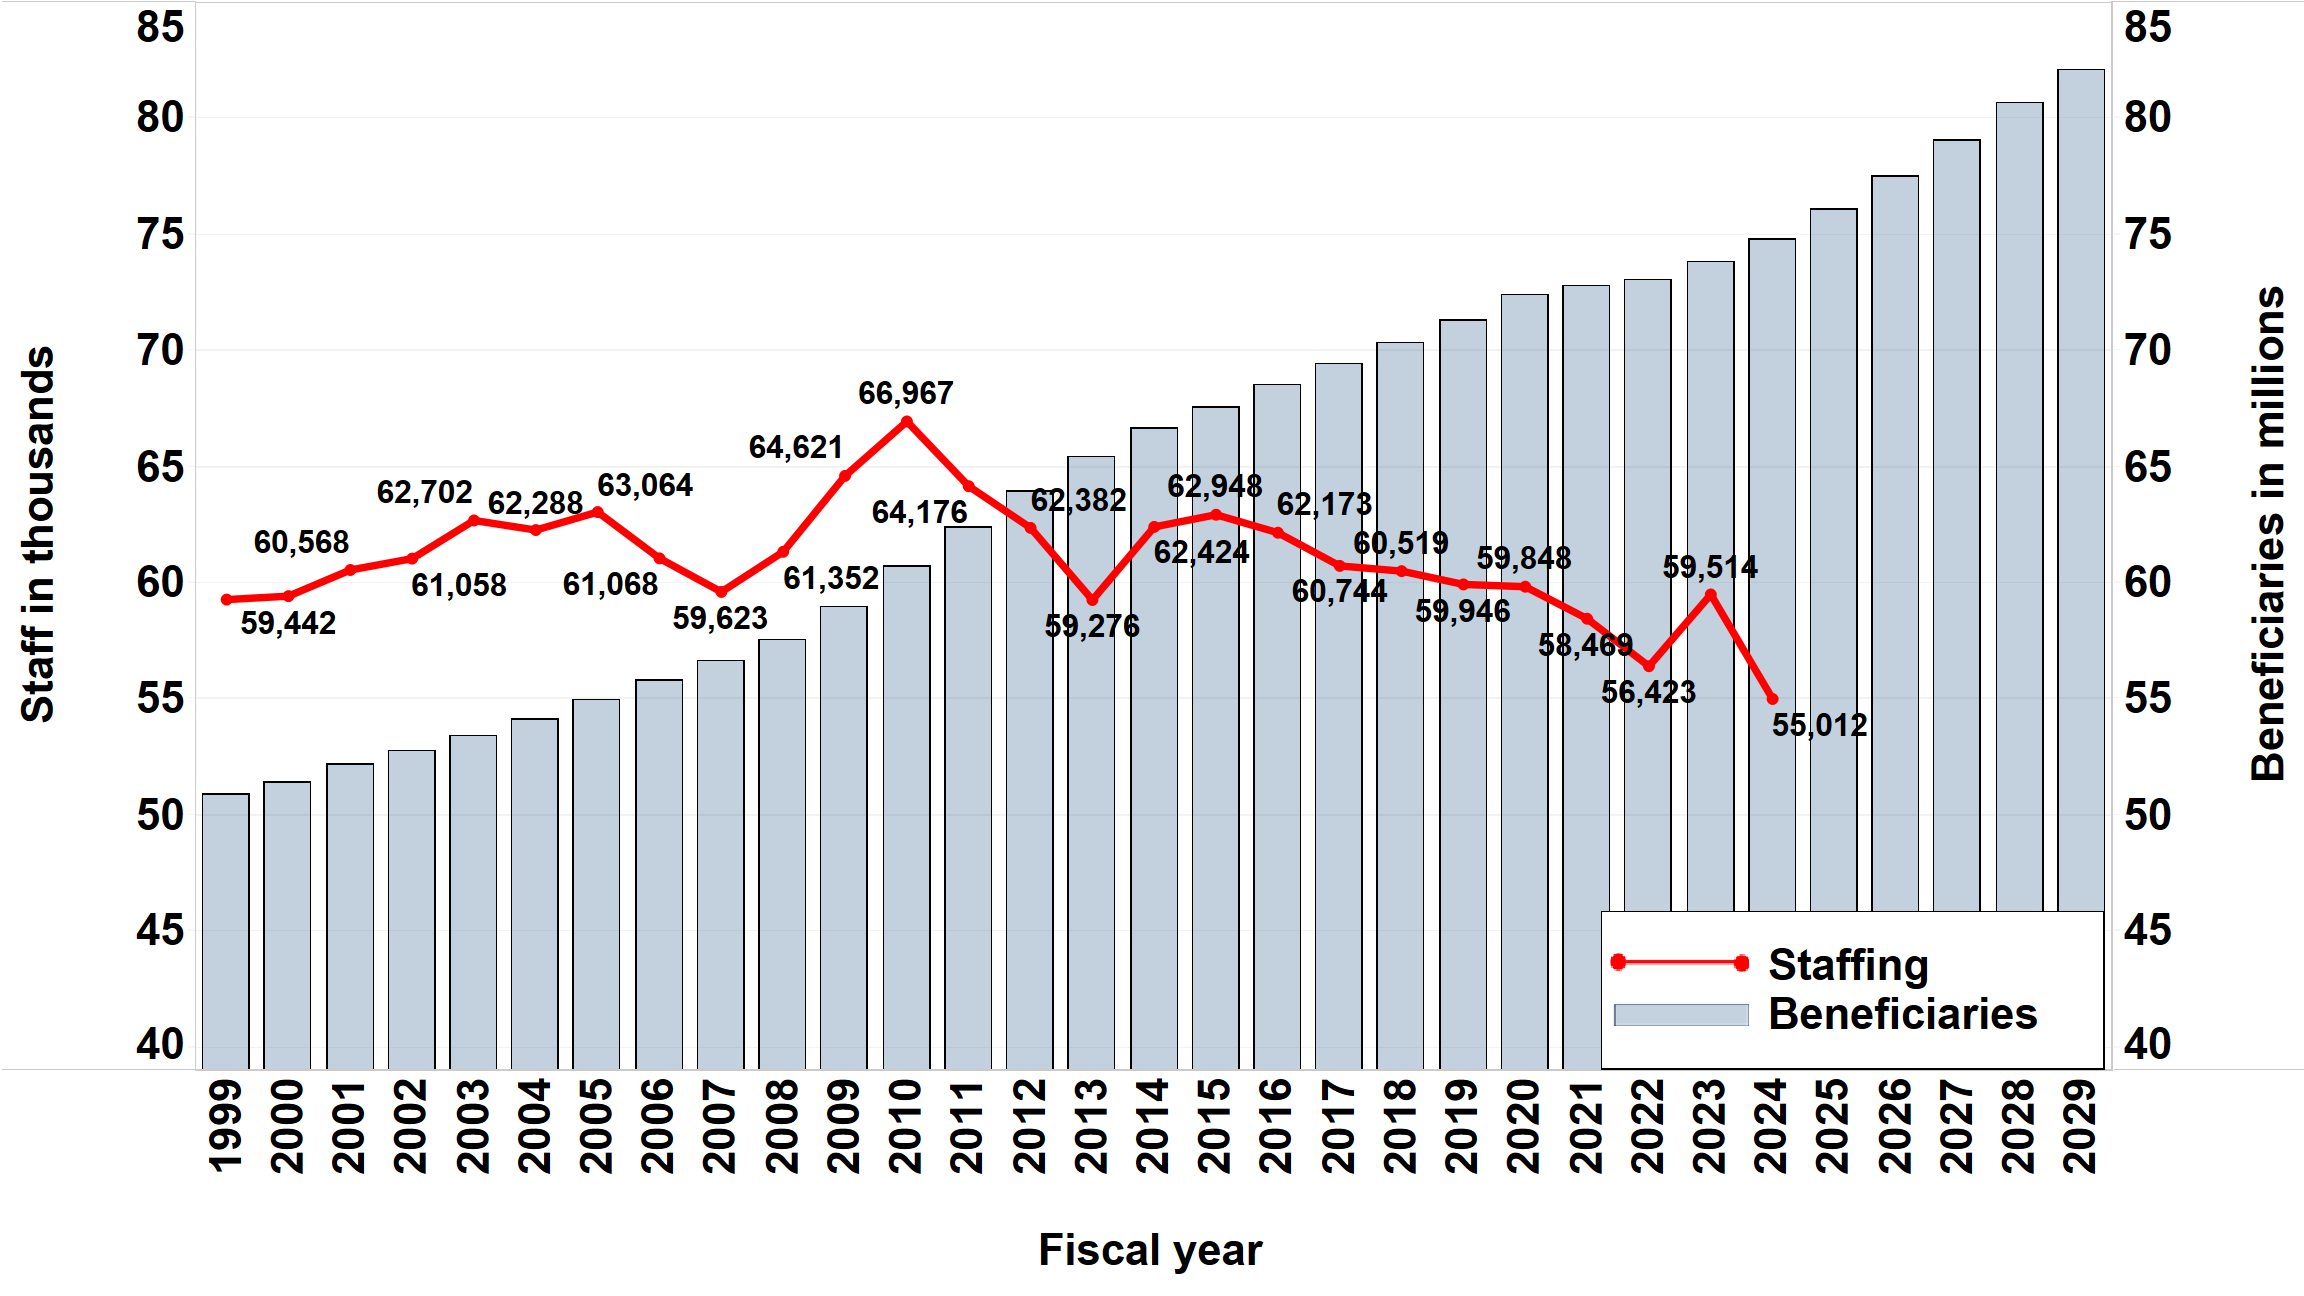 Line chart showing a slow and steady decline in staff over 25 years.  Beginning in 1999, SSA staff was nearly 60 thousand, peaked in 2010 at nearly 67 thousand, and in 2024 was at just over 50 thousand.  The line is over a background bar chart representing the total number of beneficiaries.  The bar chart shows steady yearly growth from just over 50 million beneficiaries in 1999 to over 80 million projected for 2029.